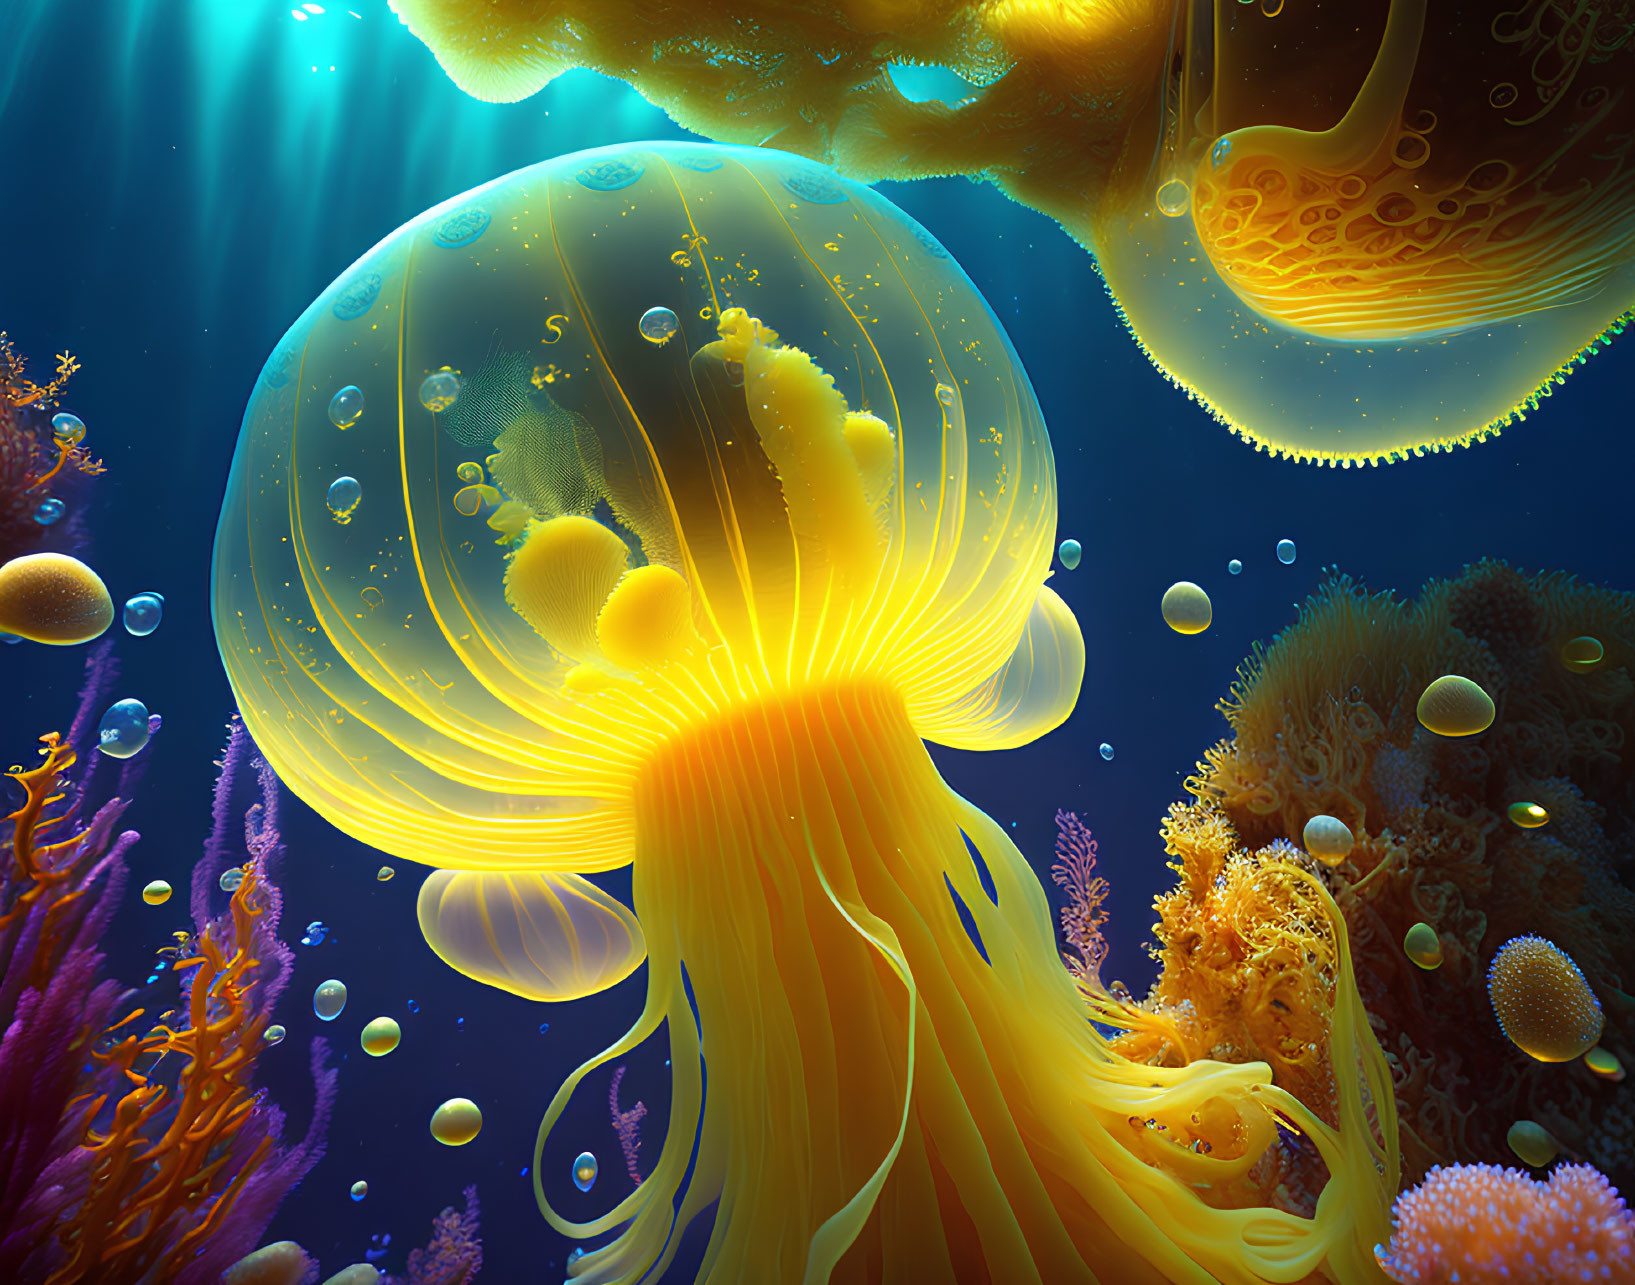 Colorful Underwater Scene with Luminescent Jellyfish and Coral Reefs